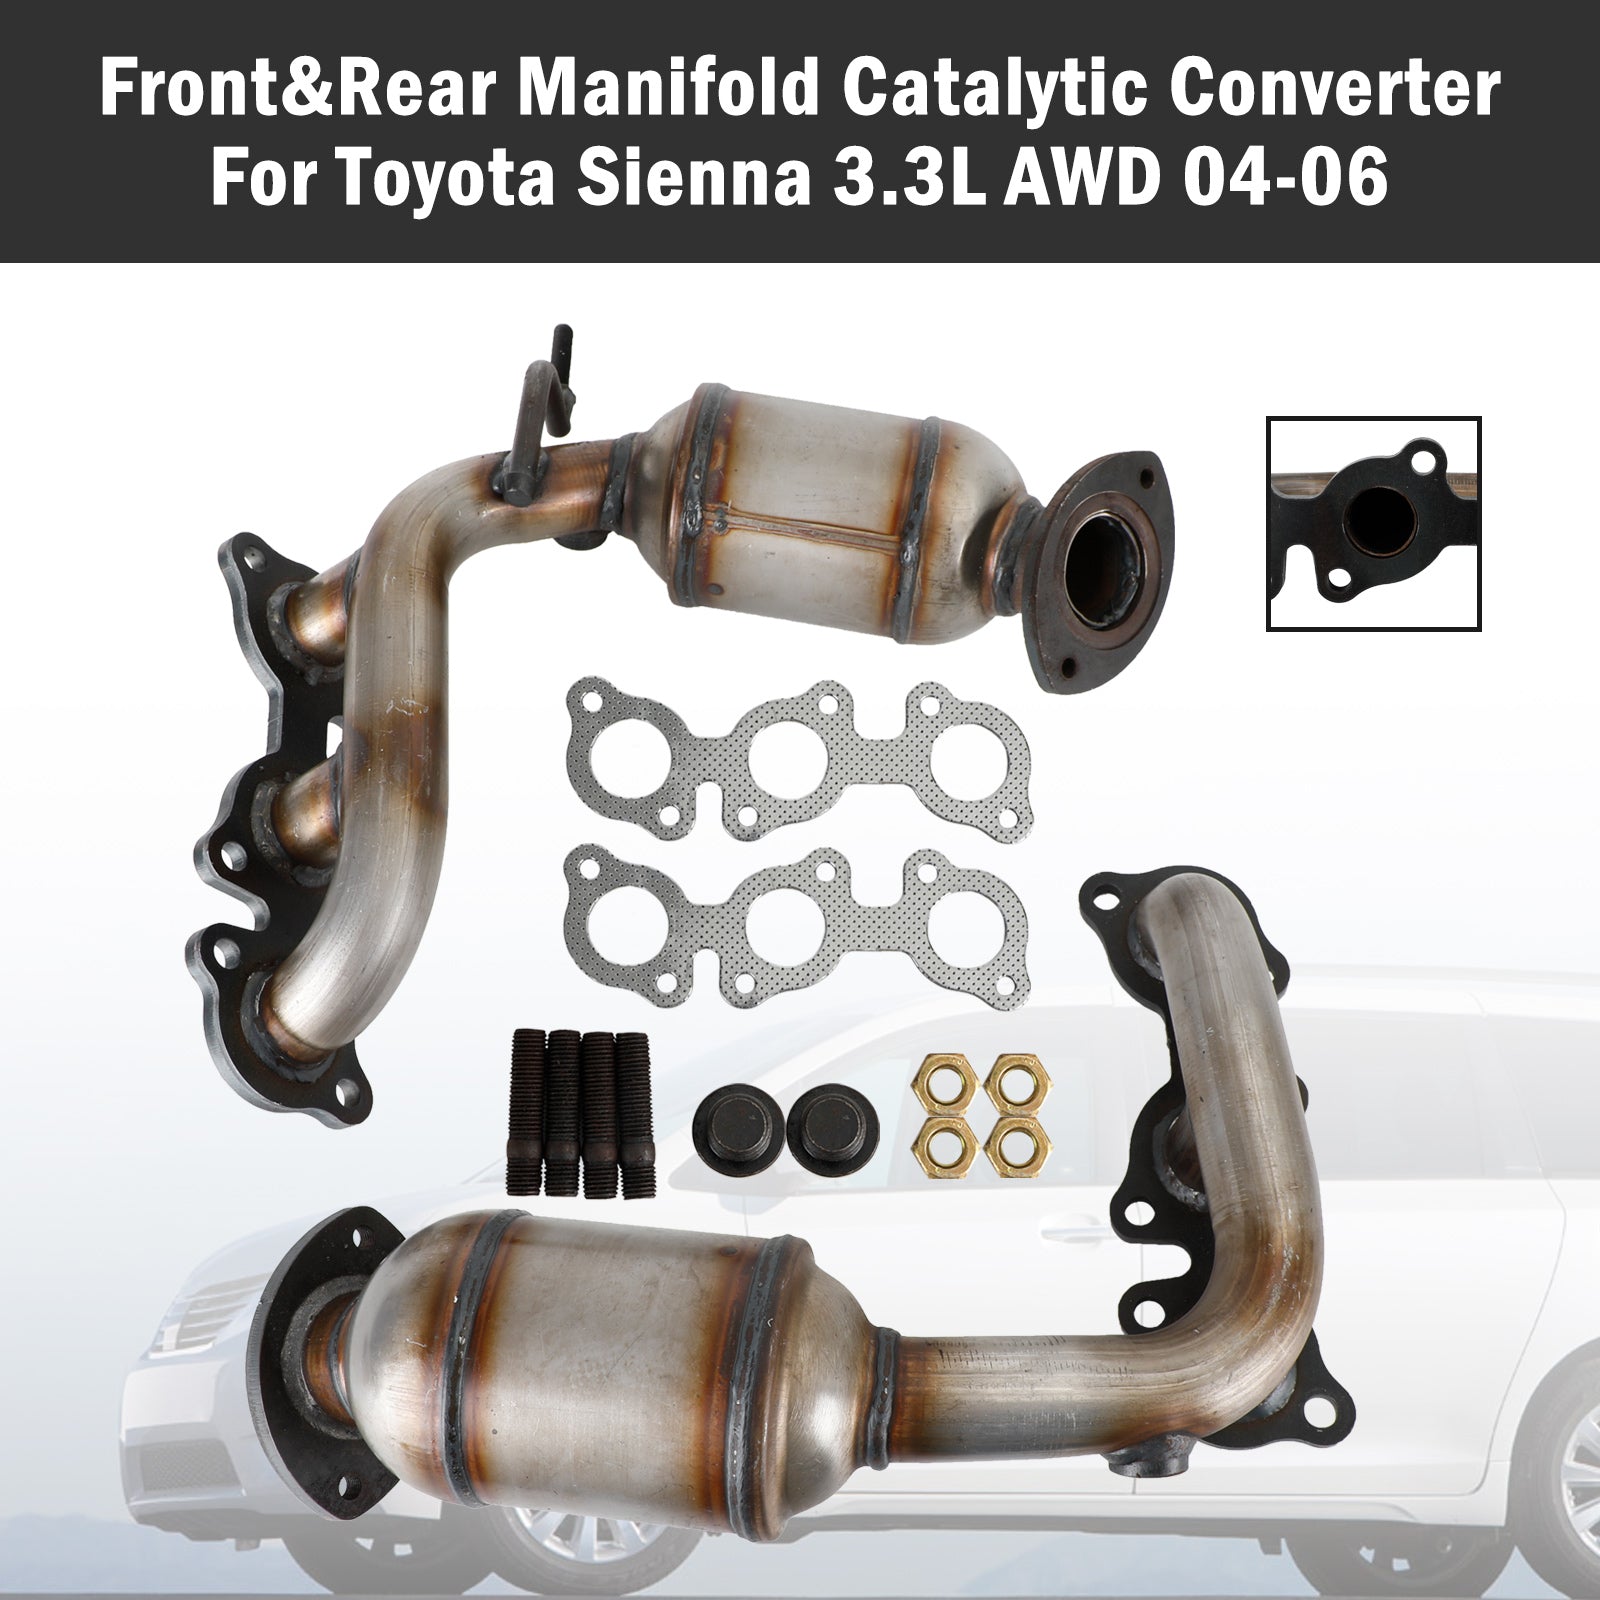 Toyota 2004-2006 Sienna 3.3L AWD Front & Rear Catalytic Converter